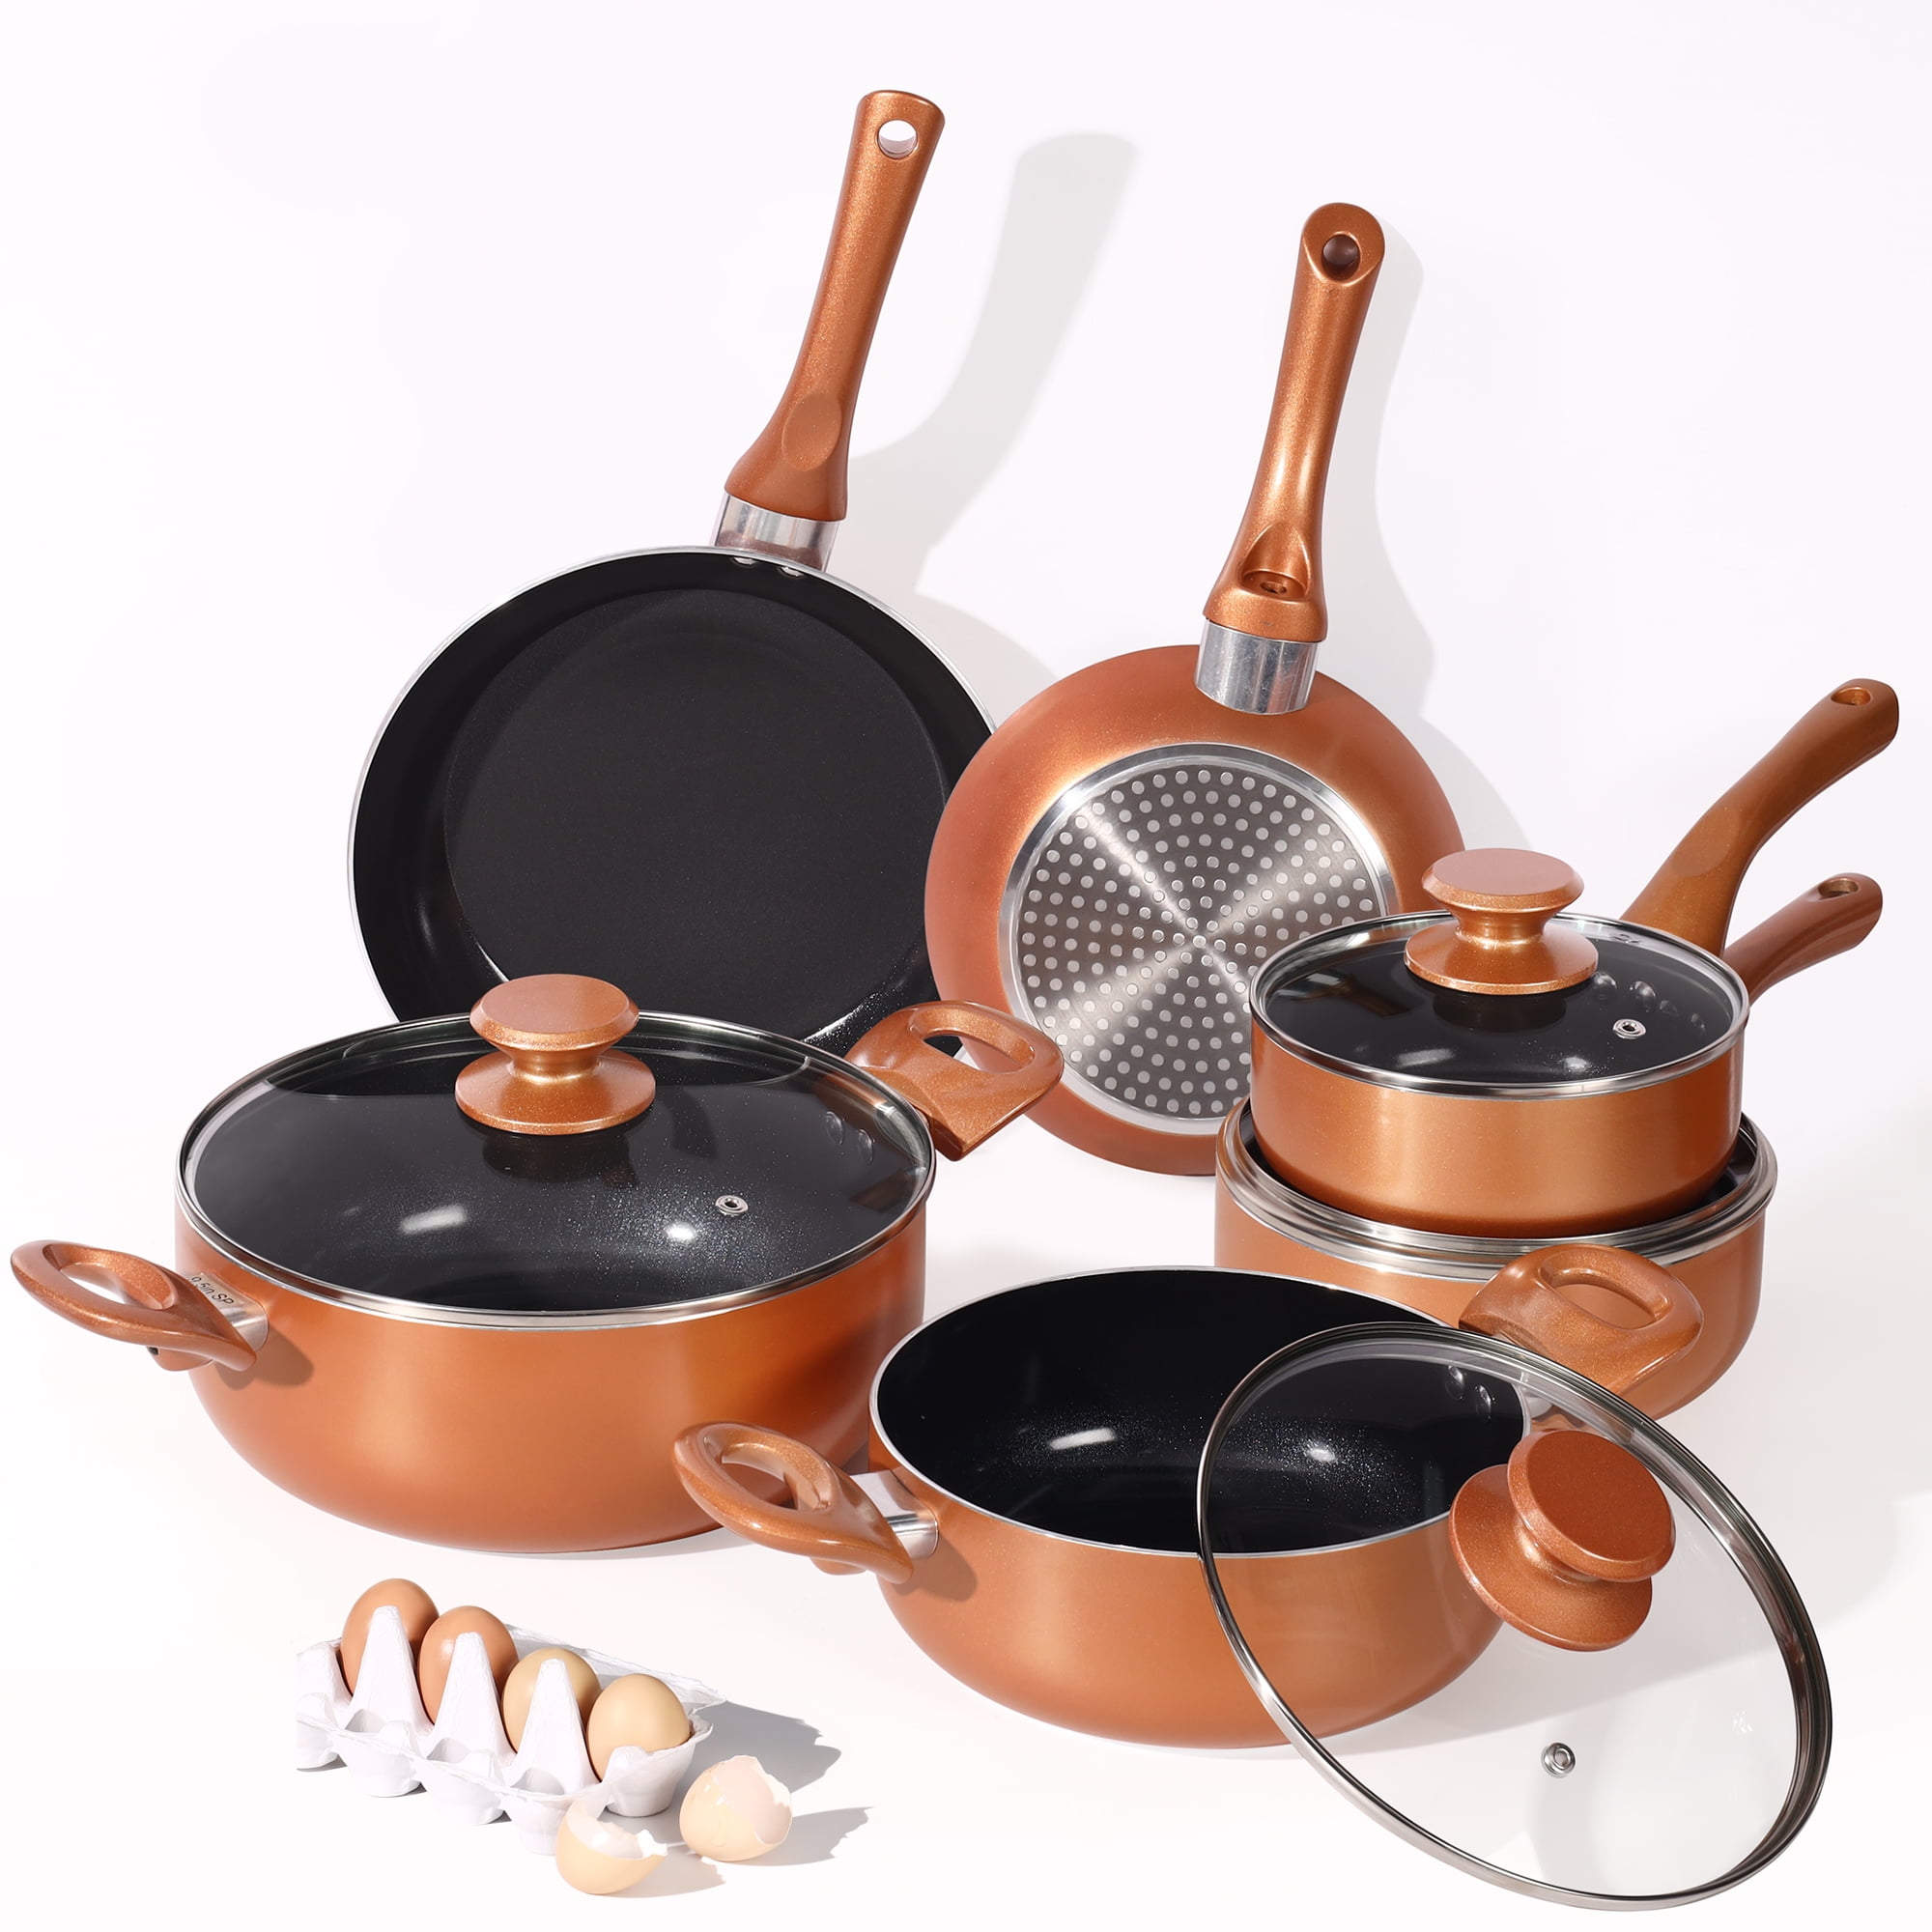 Copper Pots and Pans Set, 10 Piece Nonstick Chef Cookware Set with Ceramic  Coating, No Assembly Required Stainless Steel Handles - Bed Bath & Beyond -  37508865